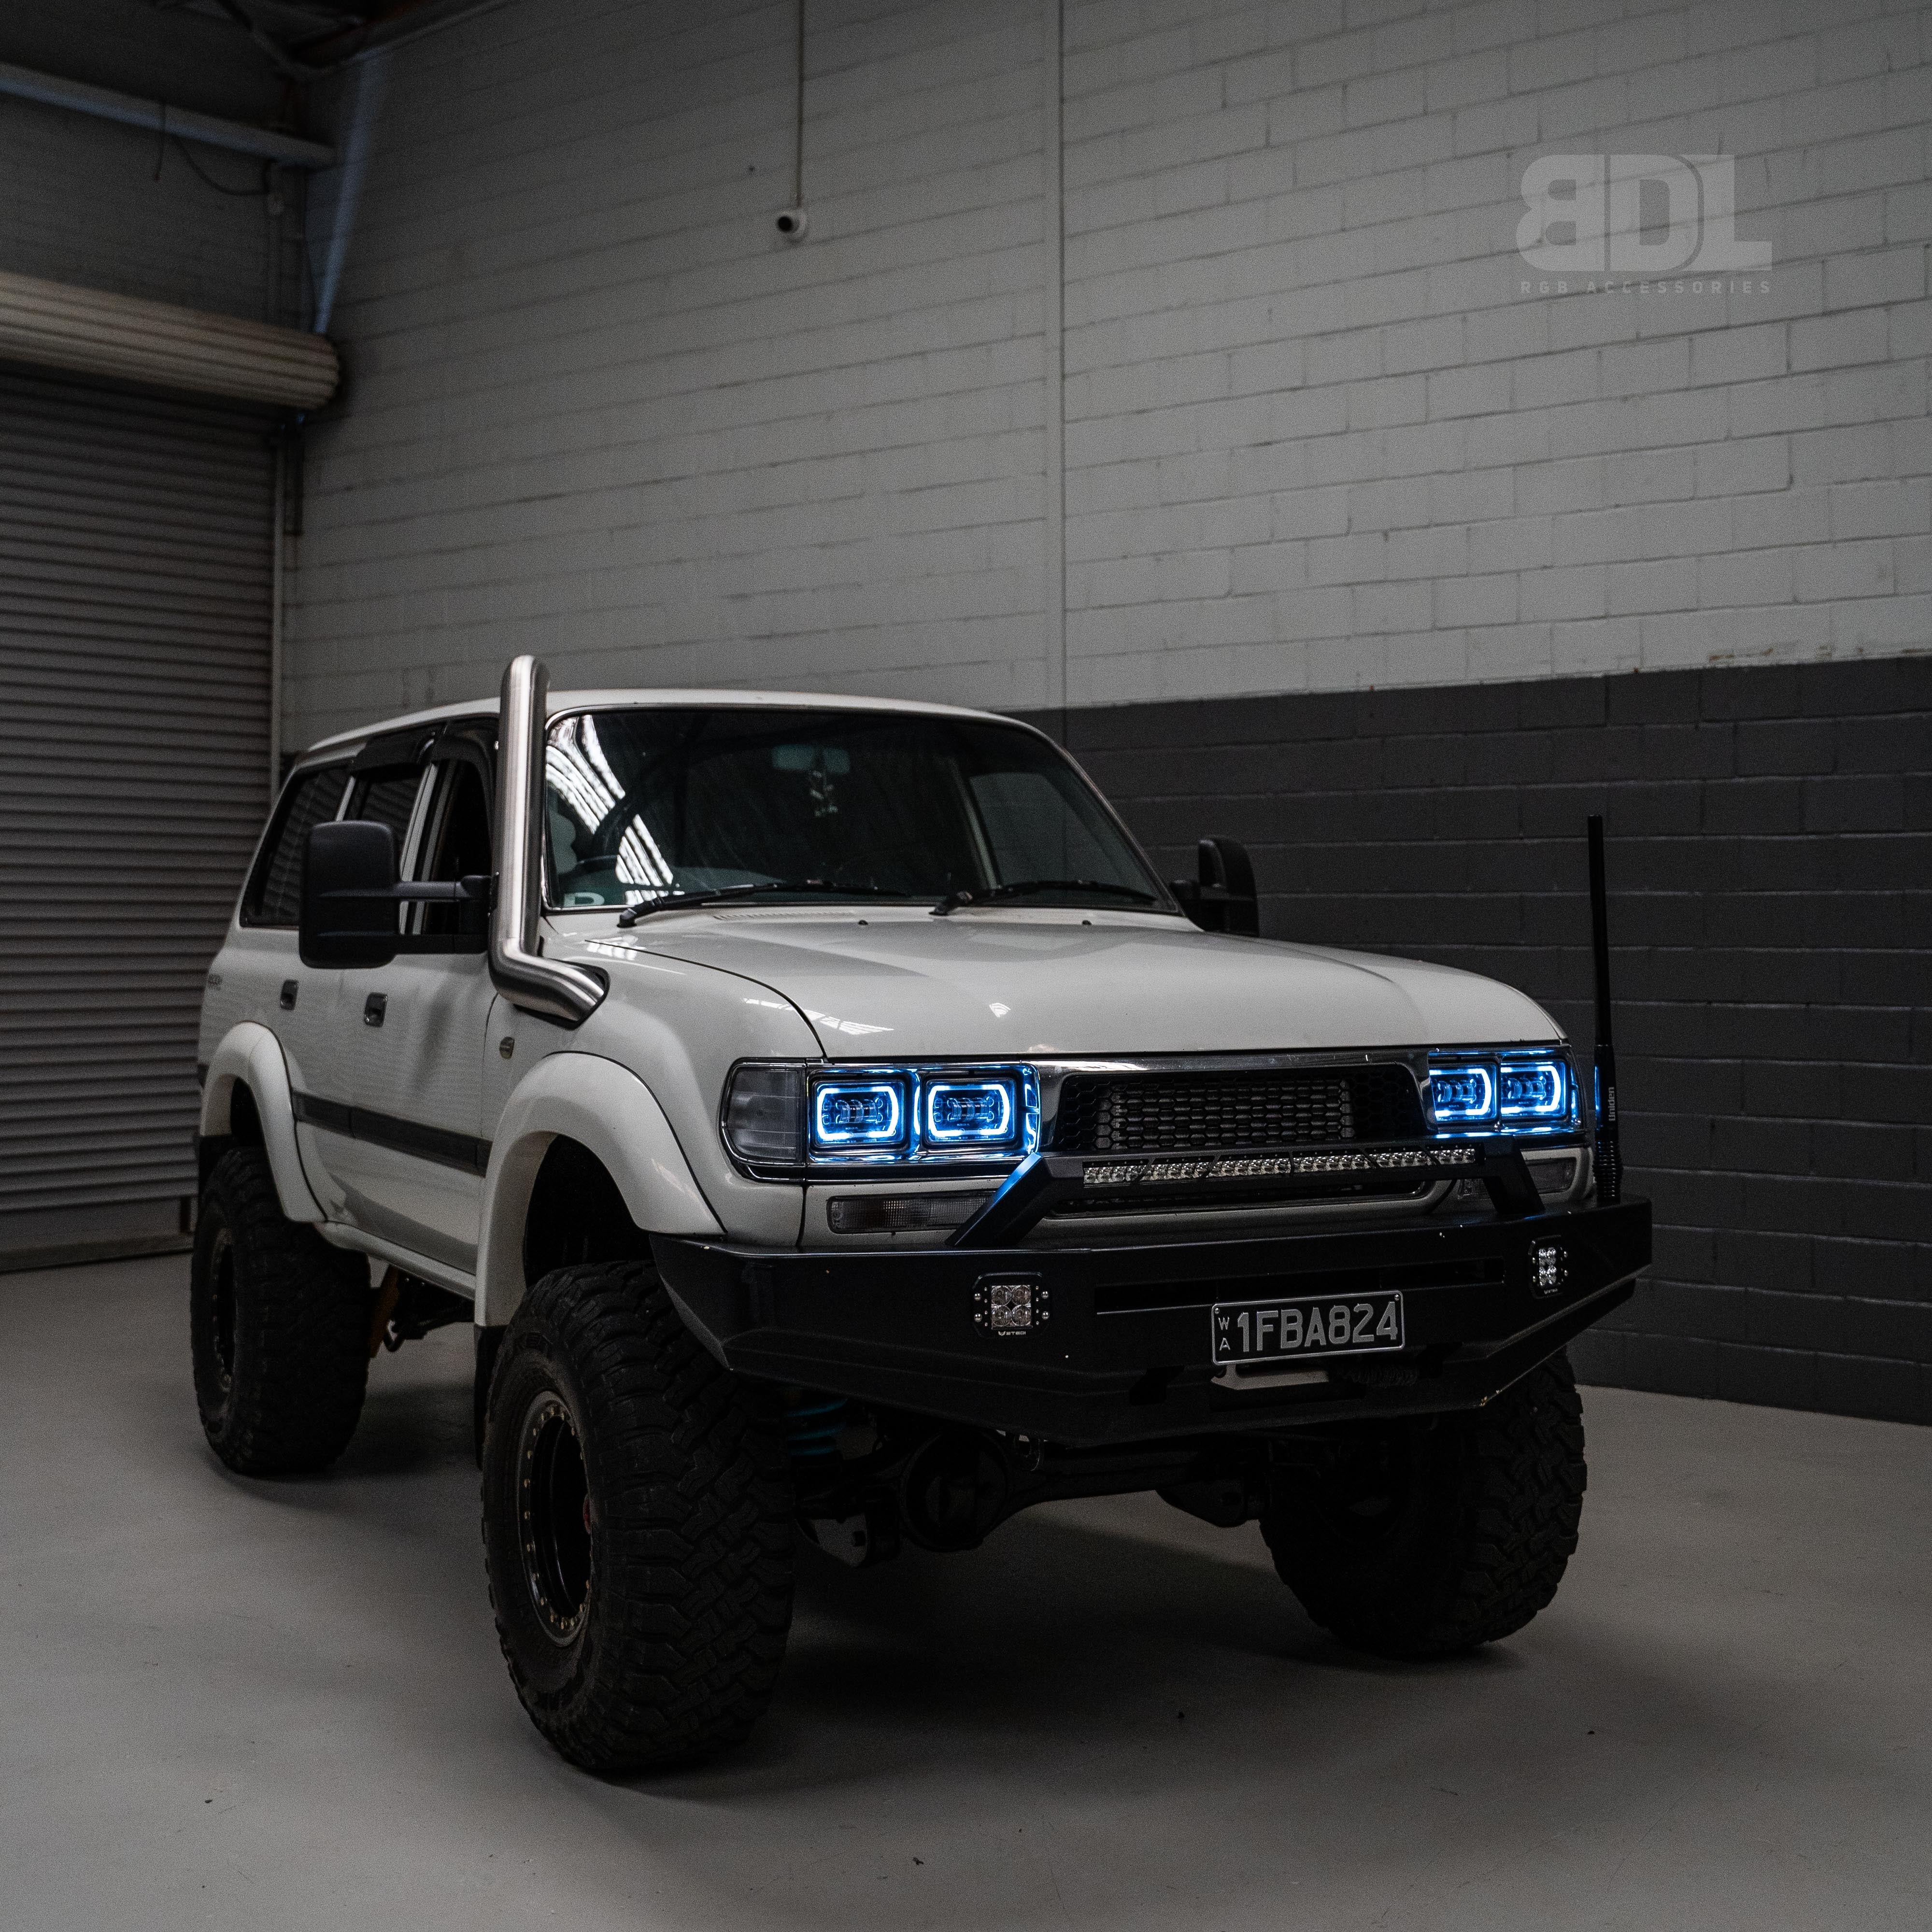 image of a while land cruiser fitted with 80 series led headlights from Bushdoof Lighting